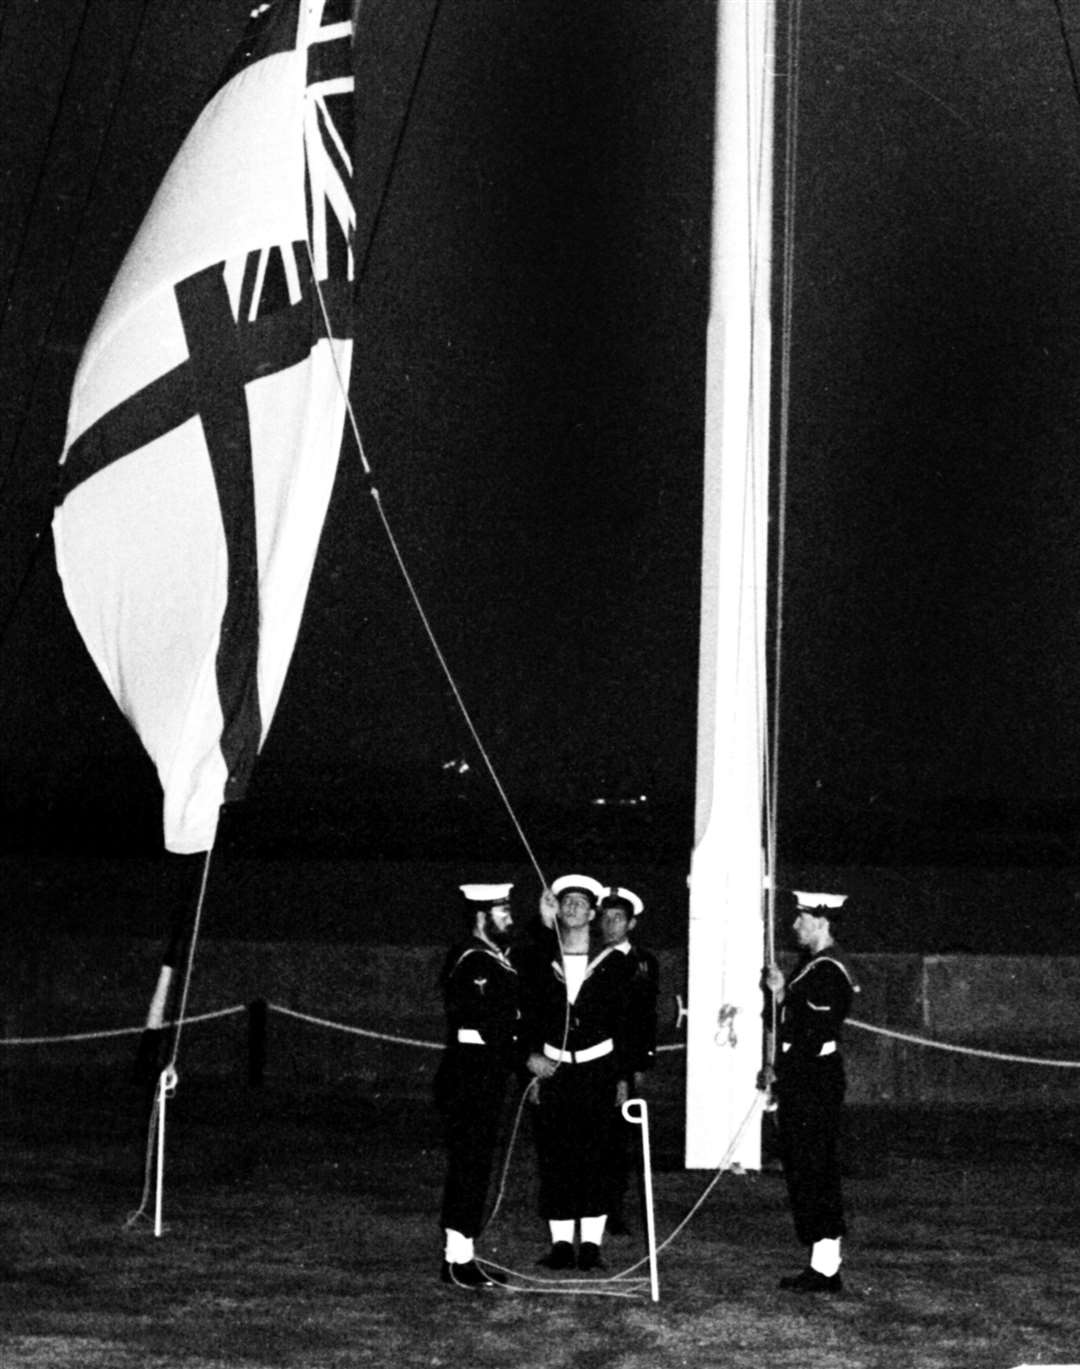 The flag is lowered for the final time at Chatham Dockyard in October 1983 when the admiral left the site after 400 years of the Royal Navy in Medway